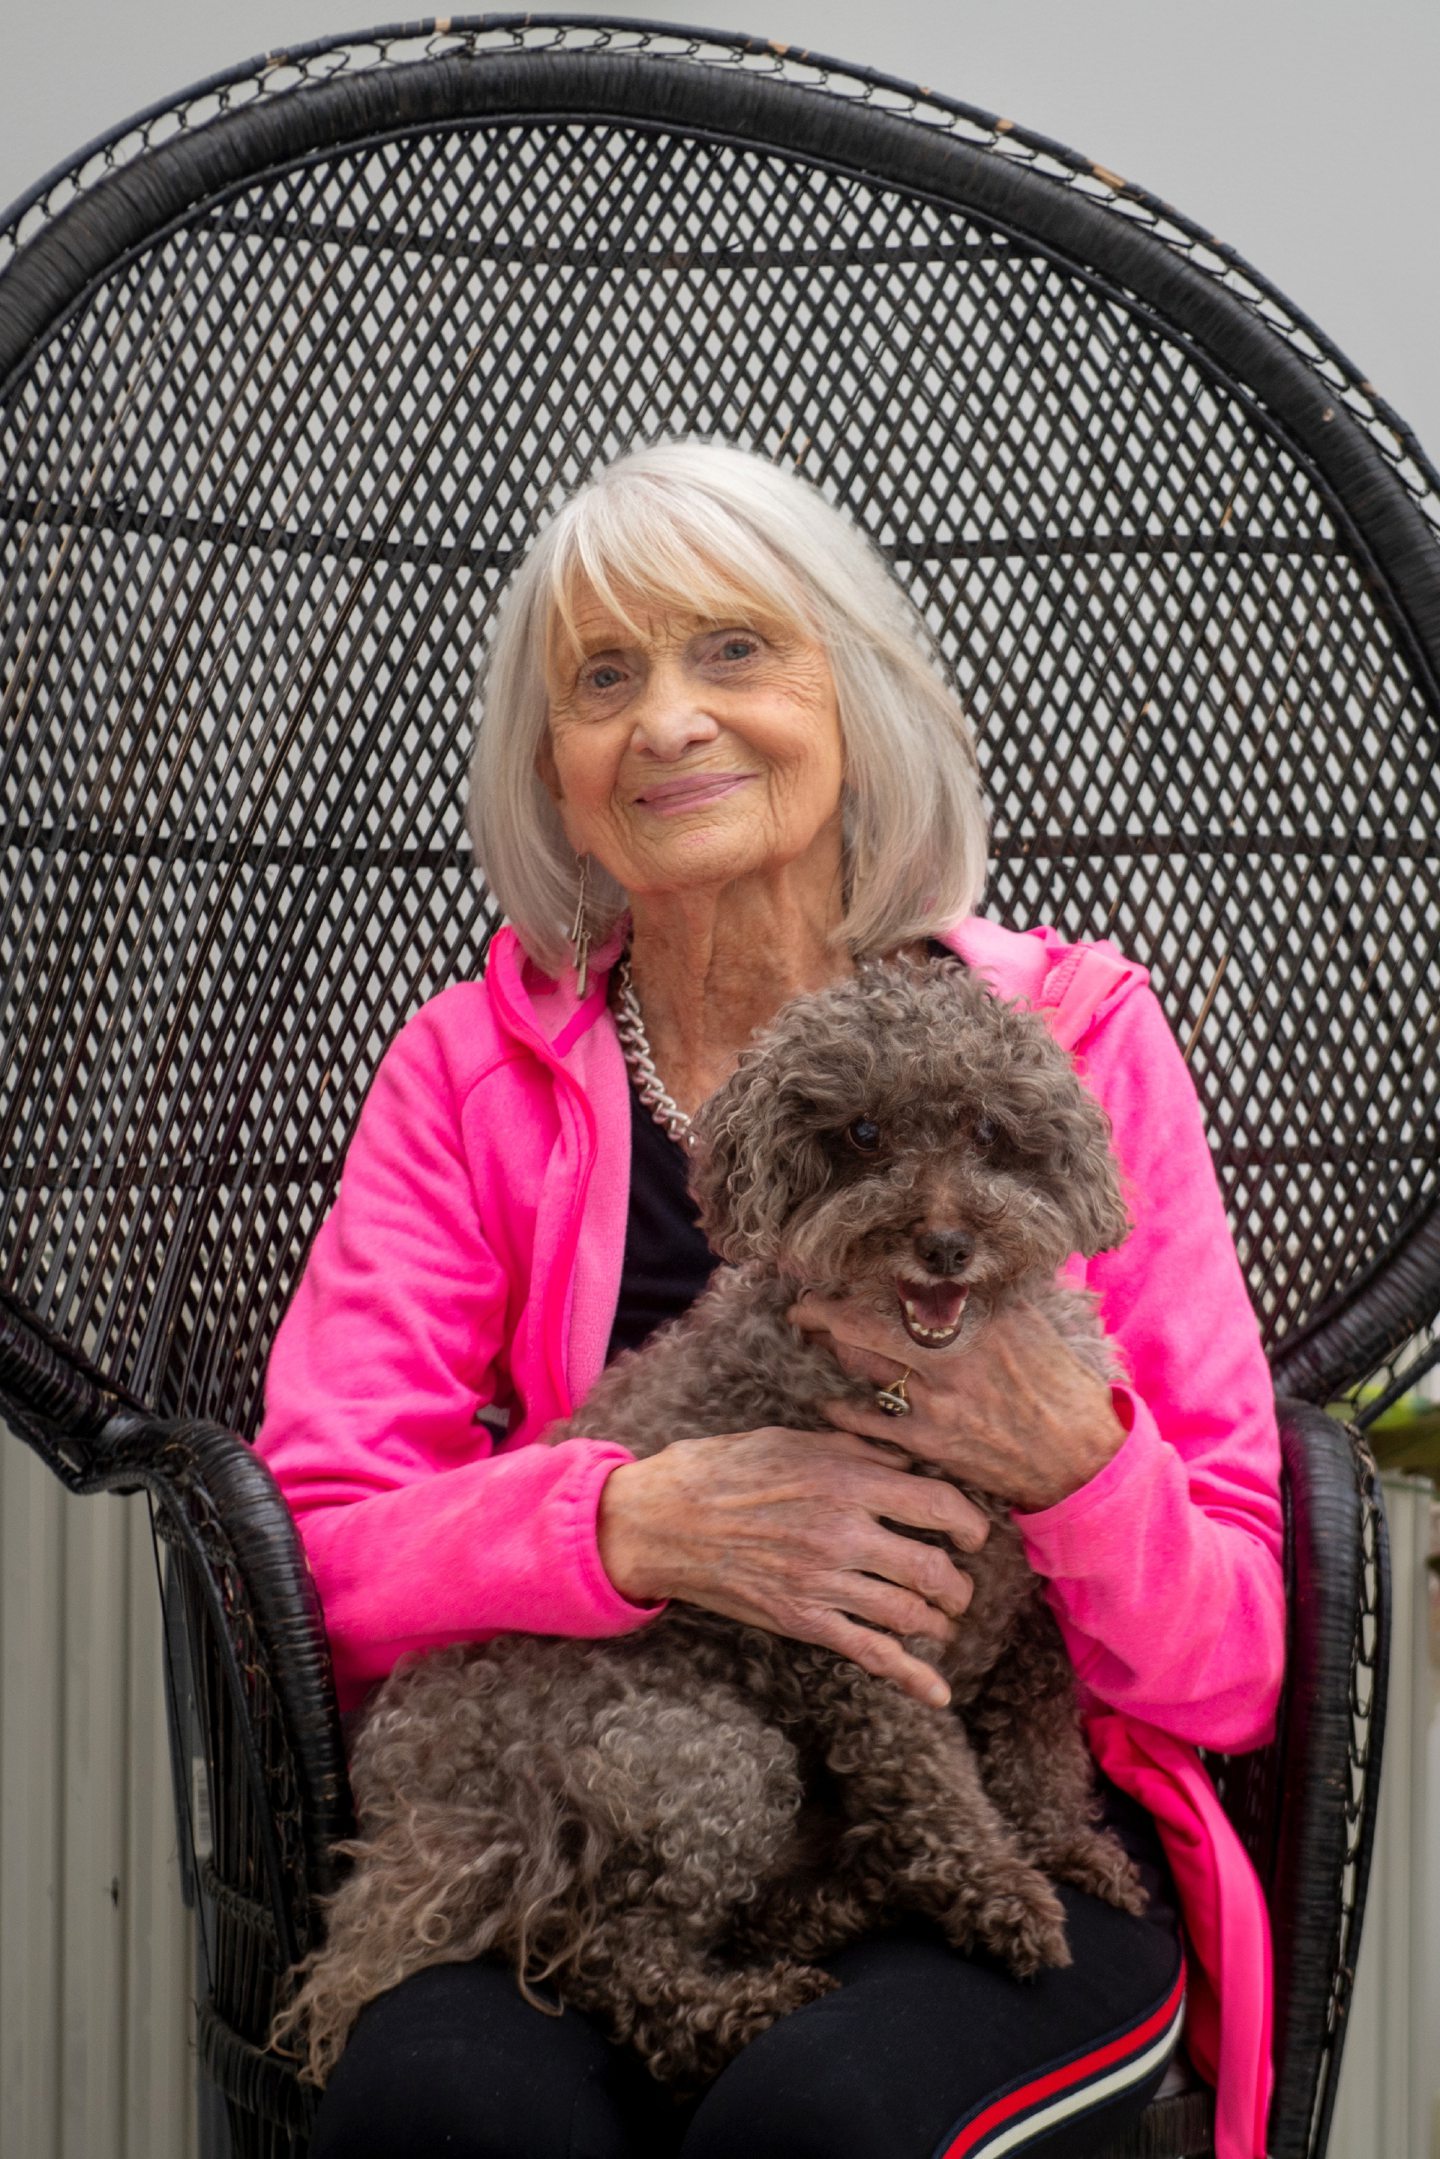 Jeane with her dog on a wicker chair